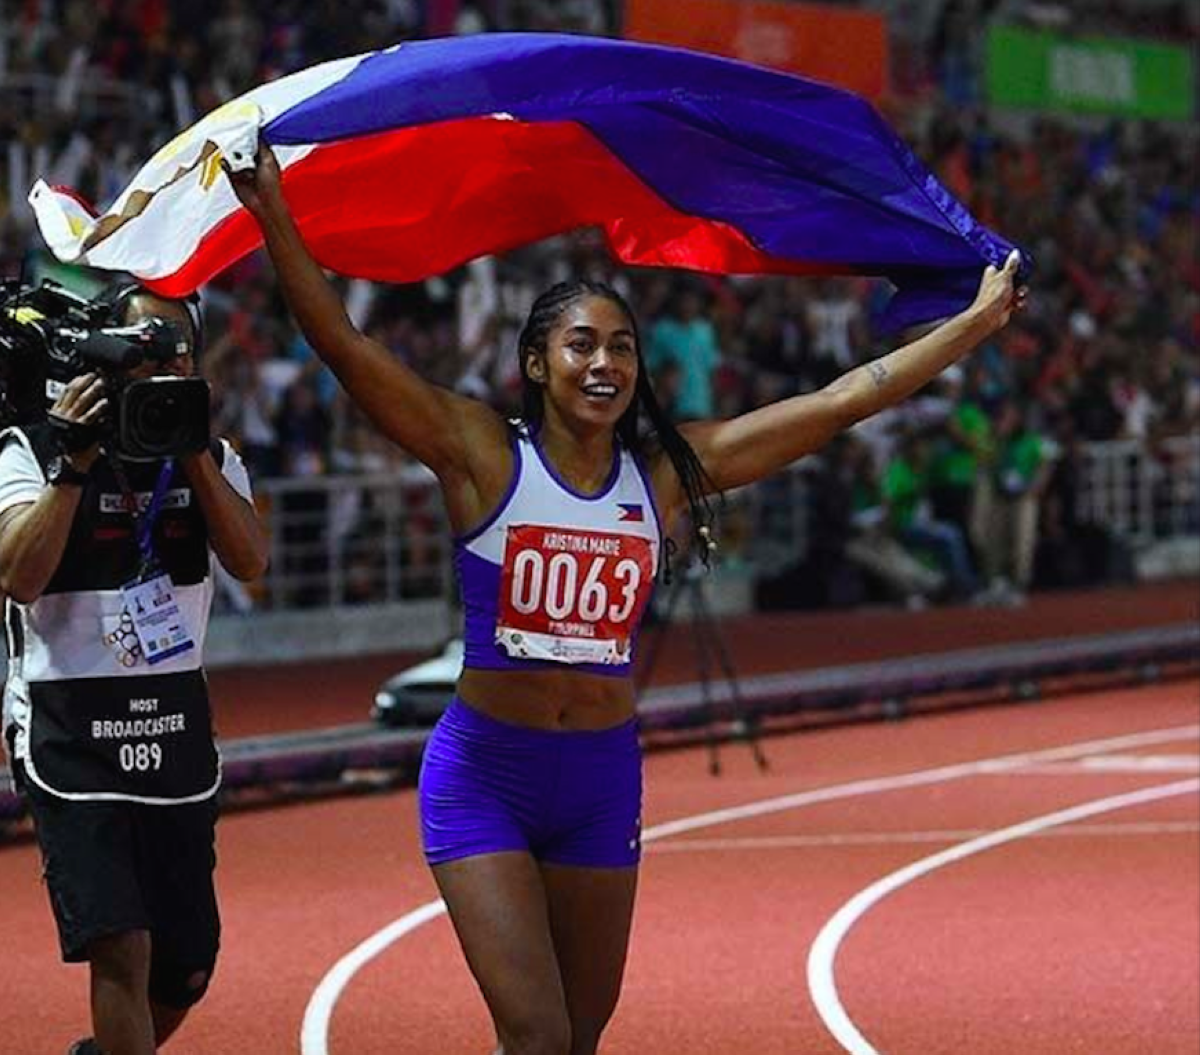 ph snares 3 golds in hk athletics championships